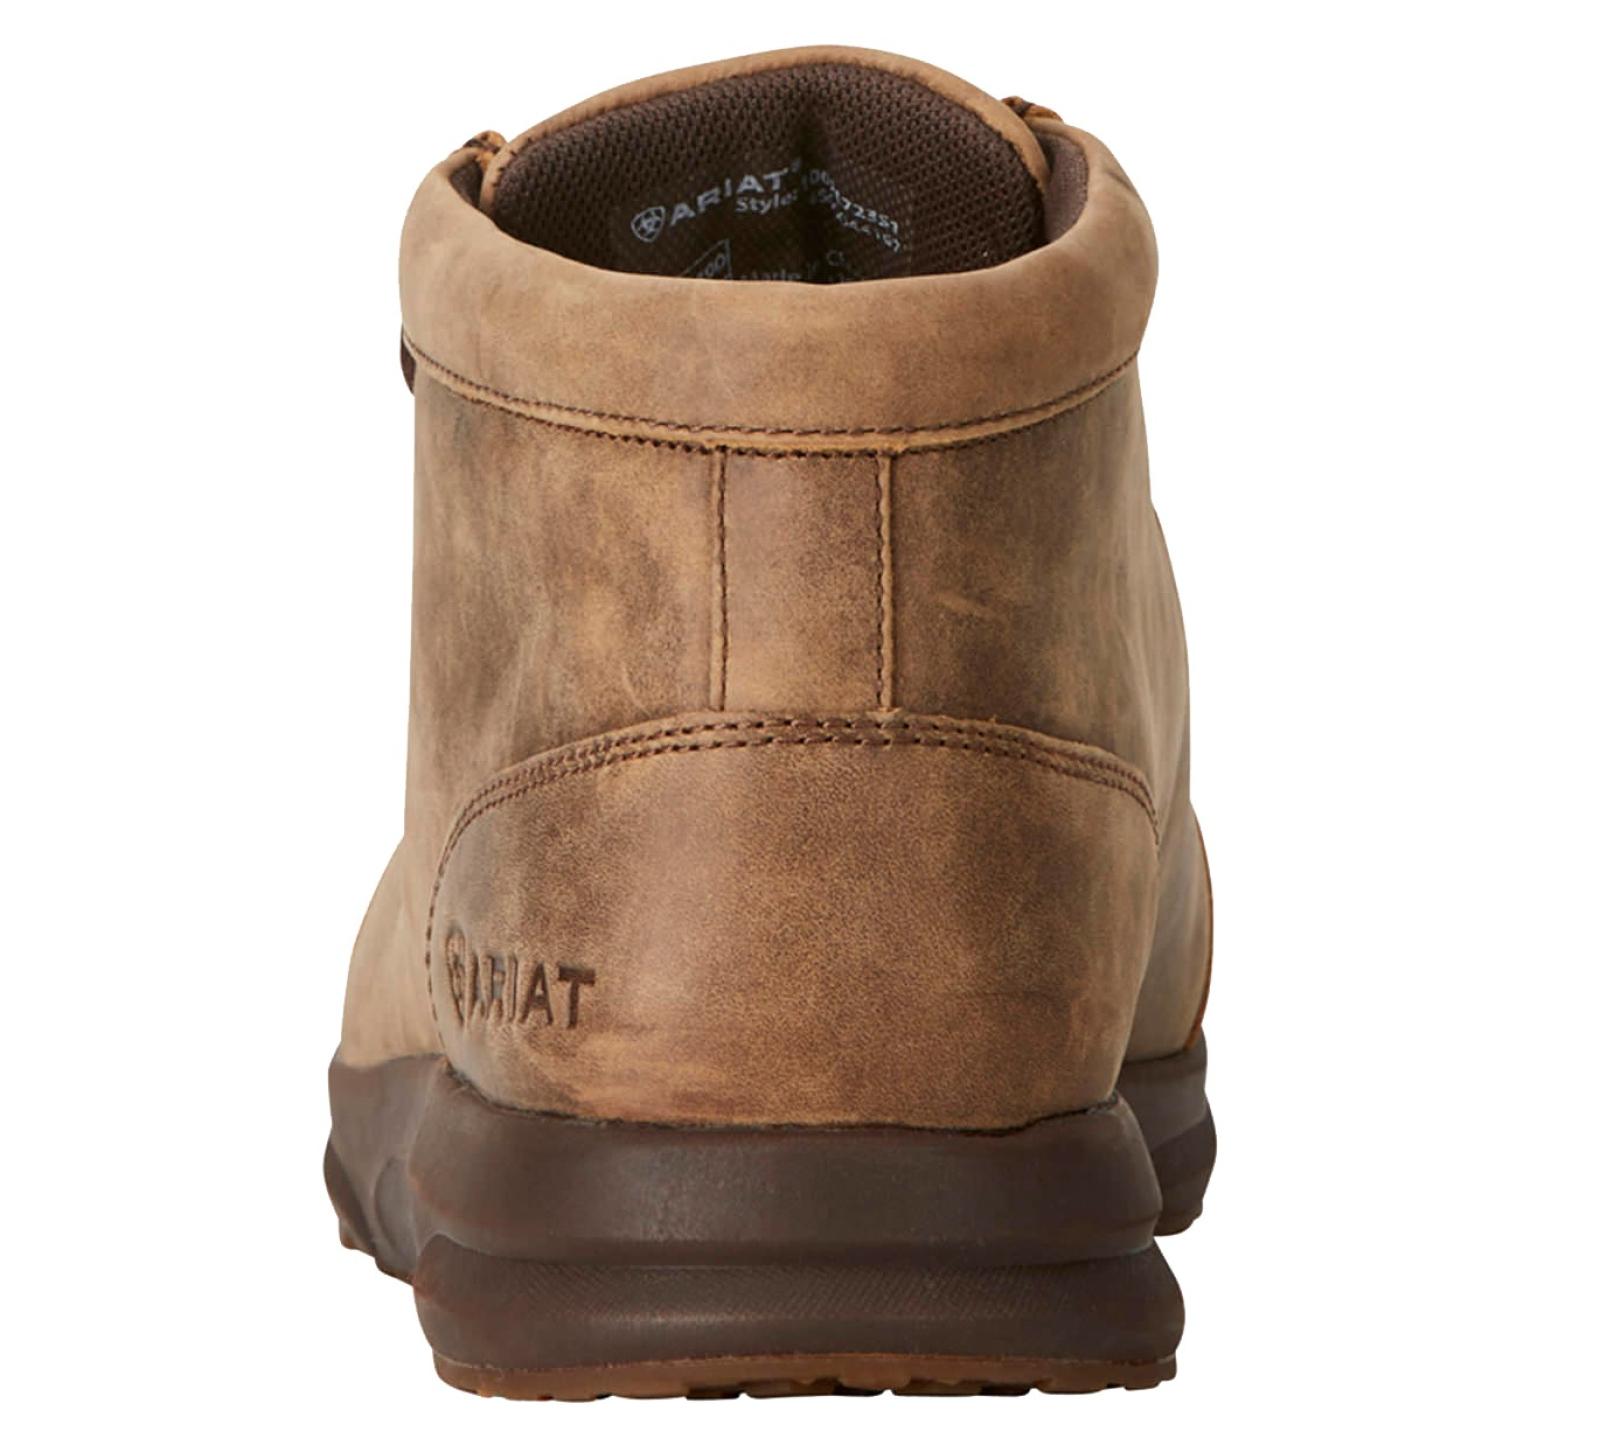 Ariat Spitfire Casual Shoe